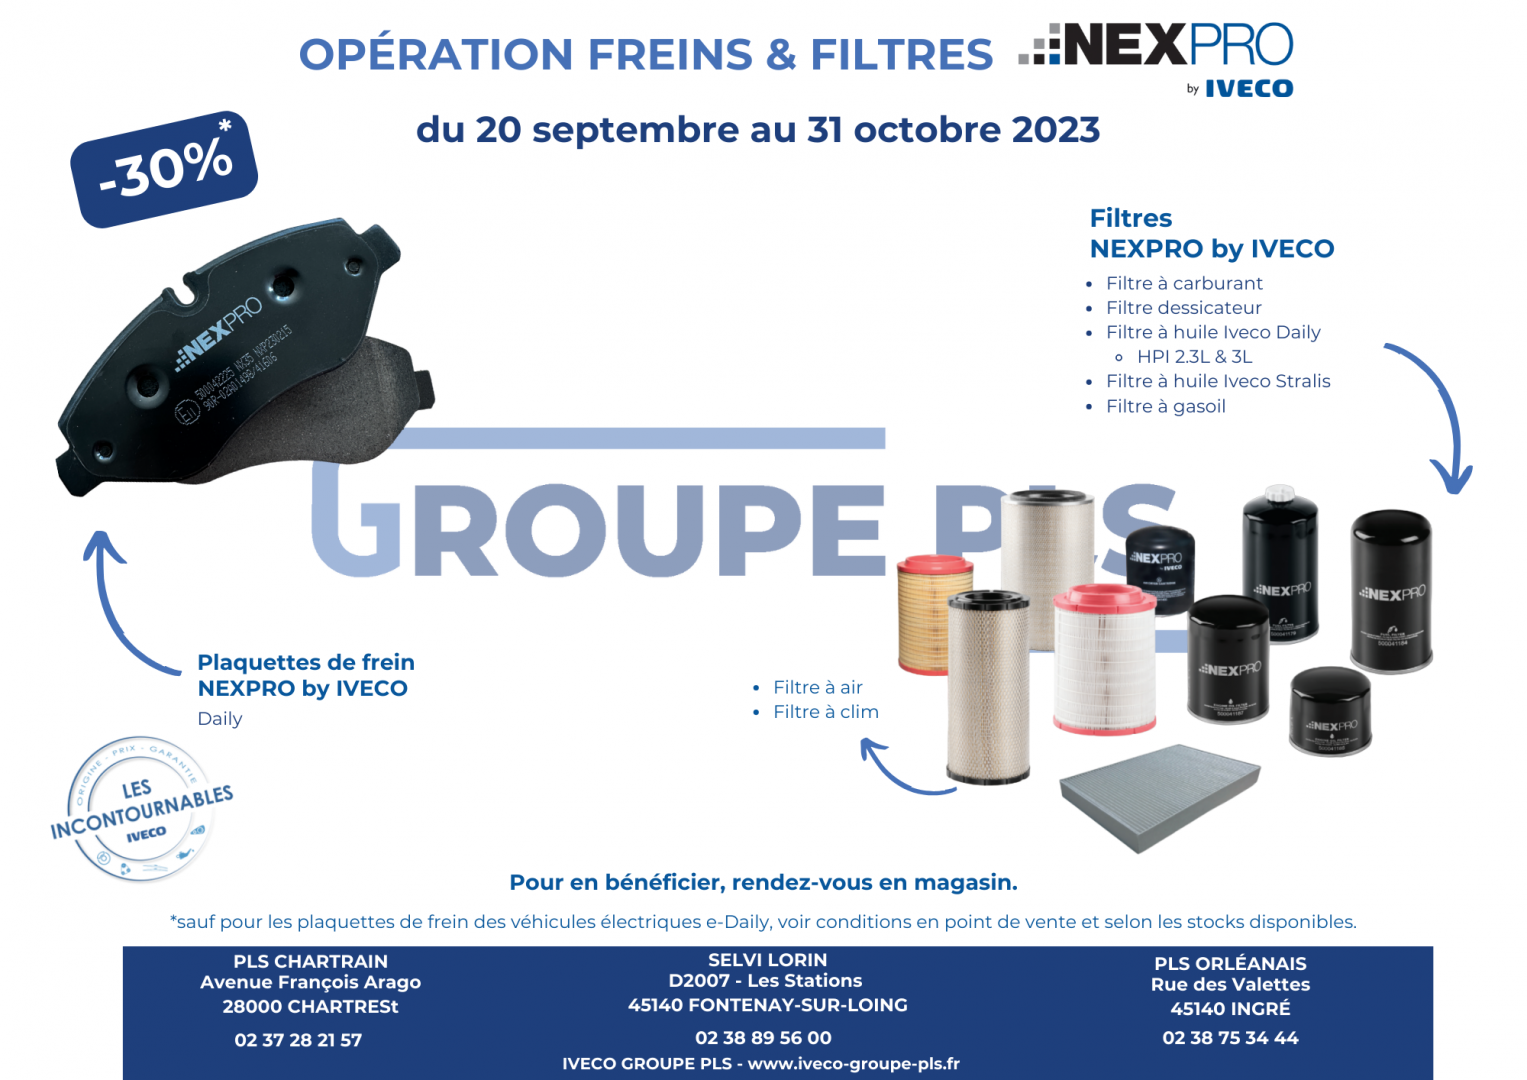 OPERATION SPÉCIALE - FREINS & FILTRES NEXPRO BY IVECO